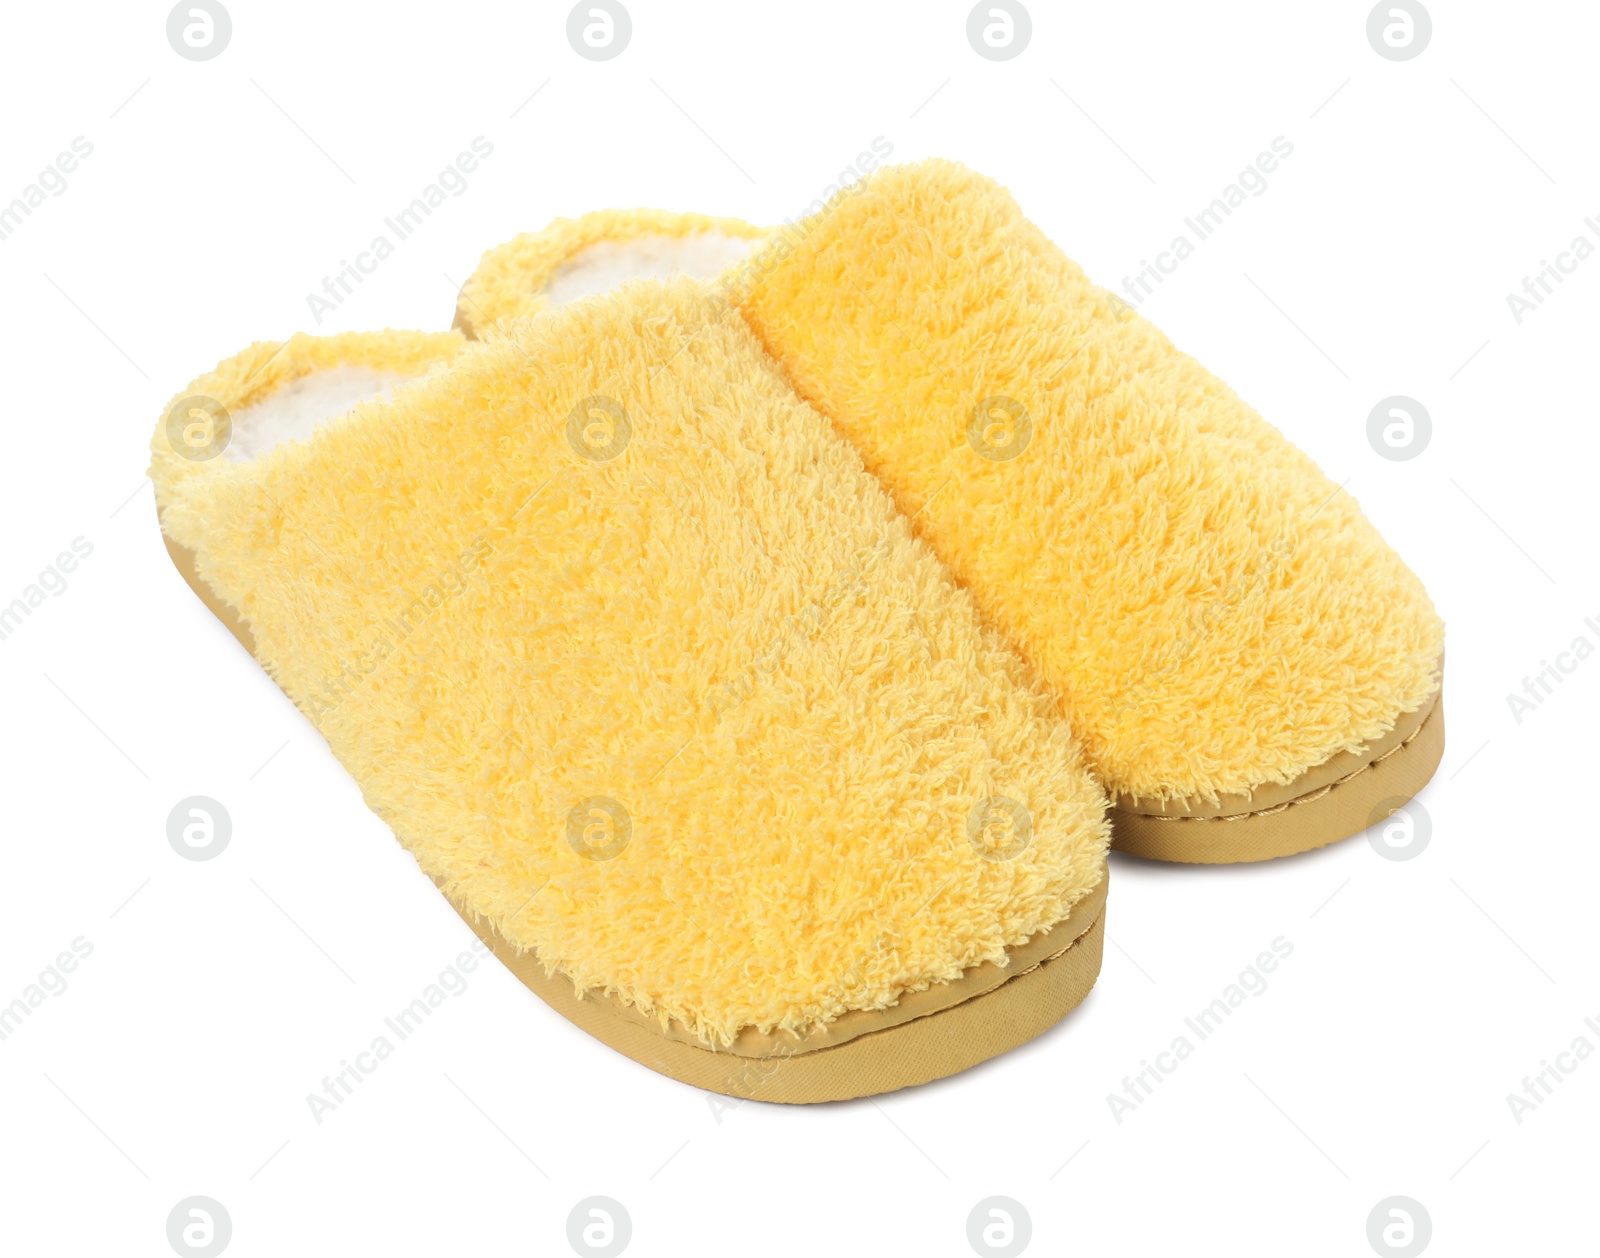 Photo of Pair of yellow soft slippers isolated on white